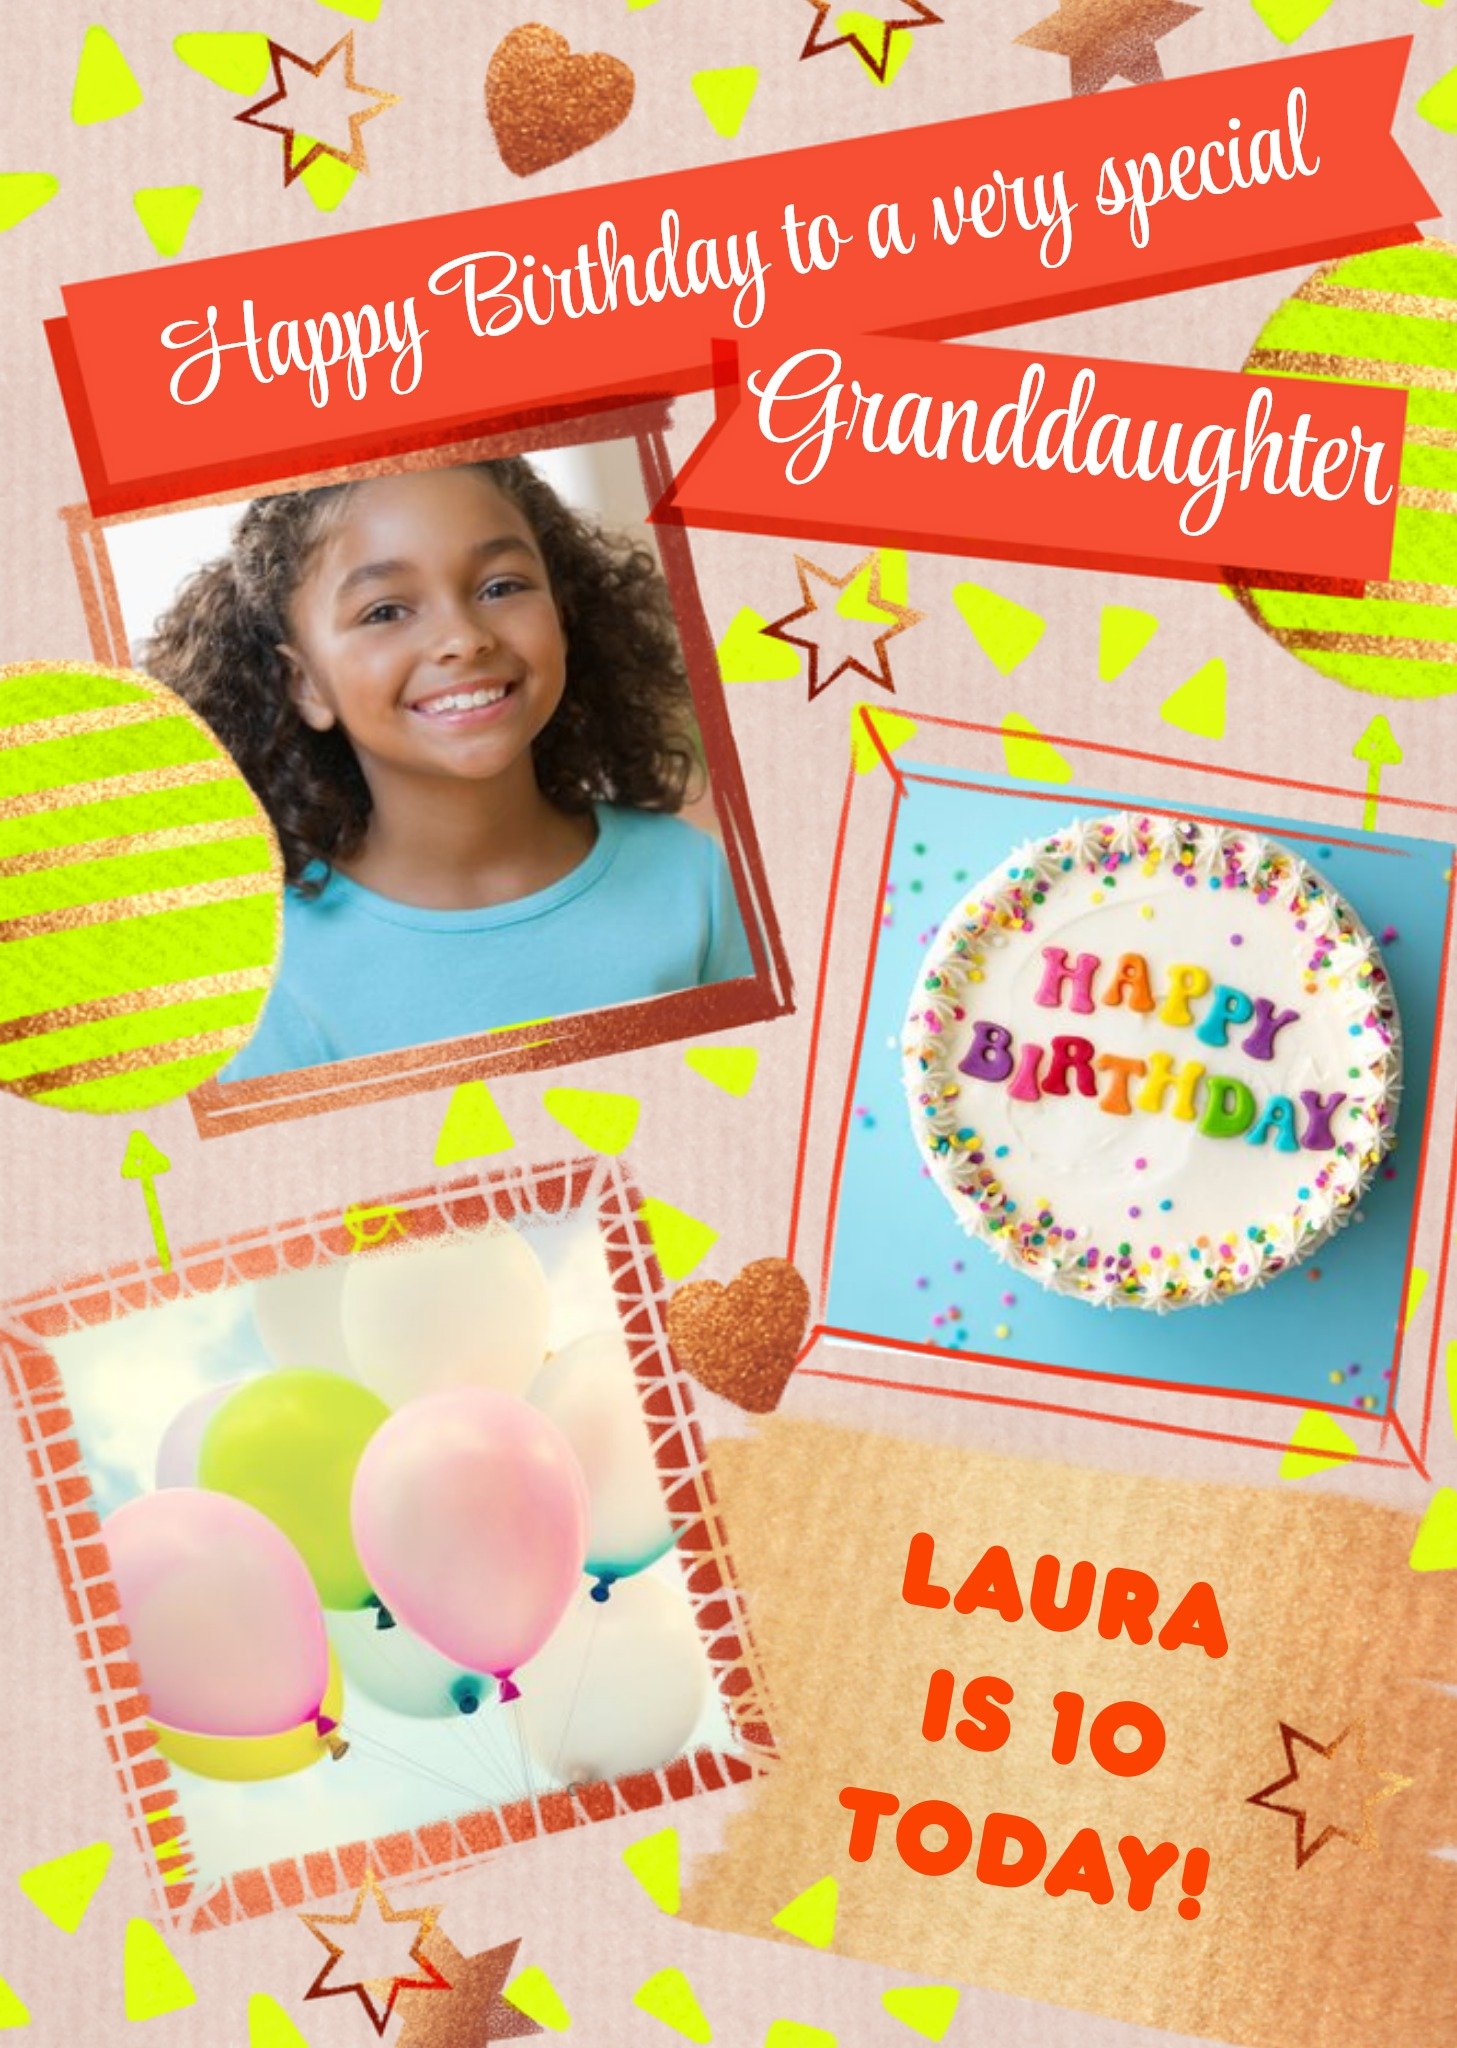 Moonpig To A Very Special Granddaughter Photo Upload Birthday Card, Large